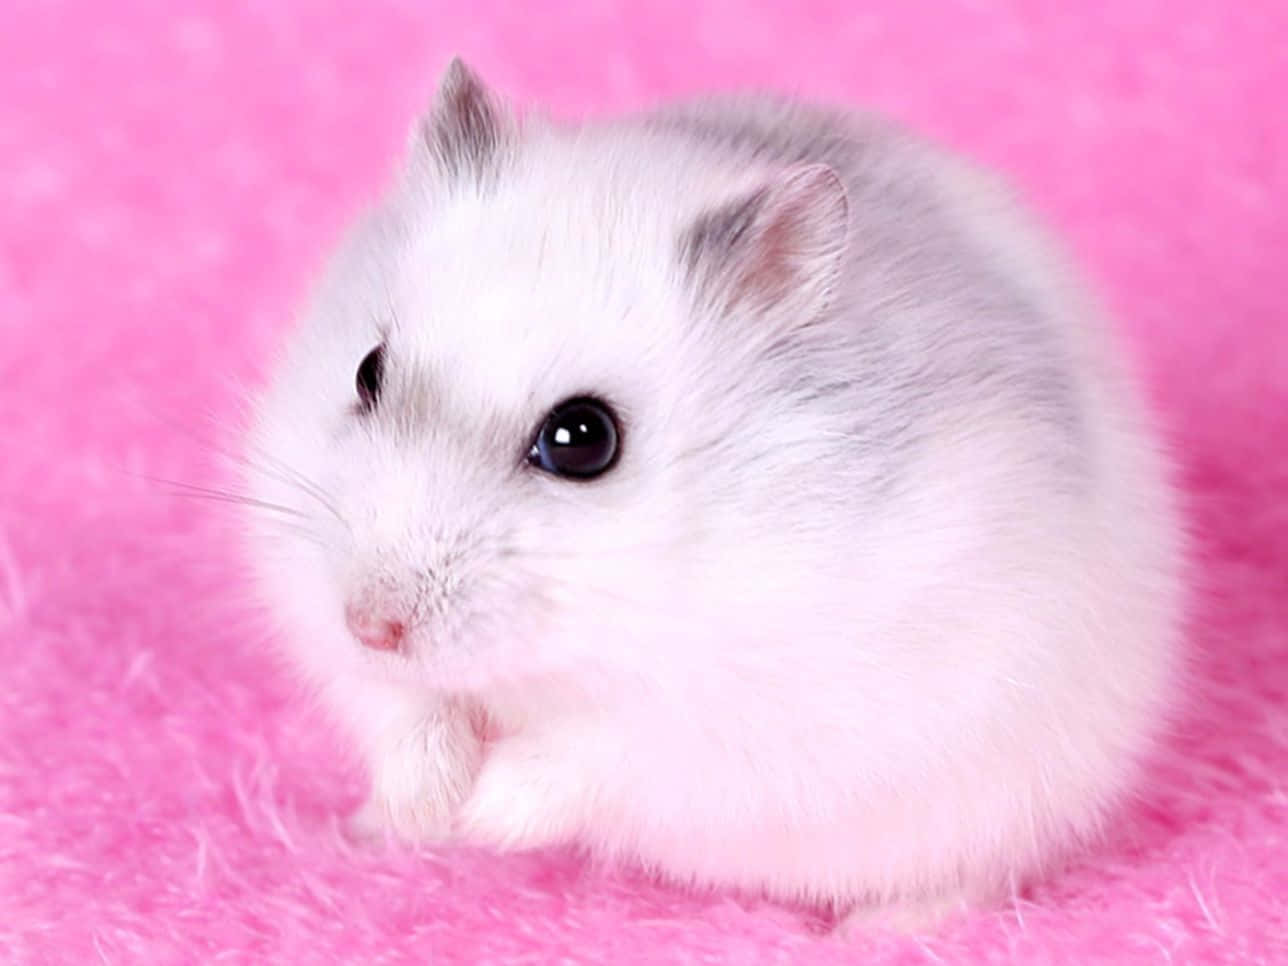 A Cute And Fluffy Hamster Looking Around. Background